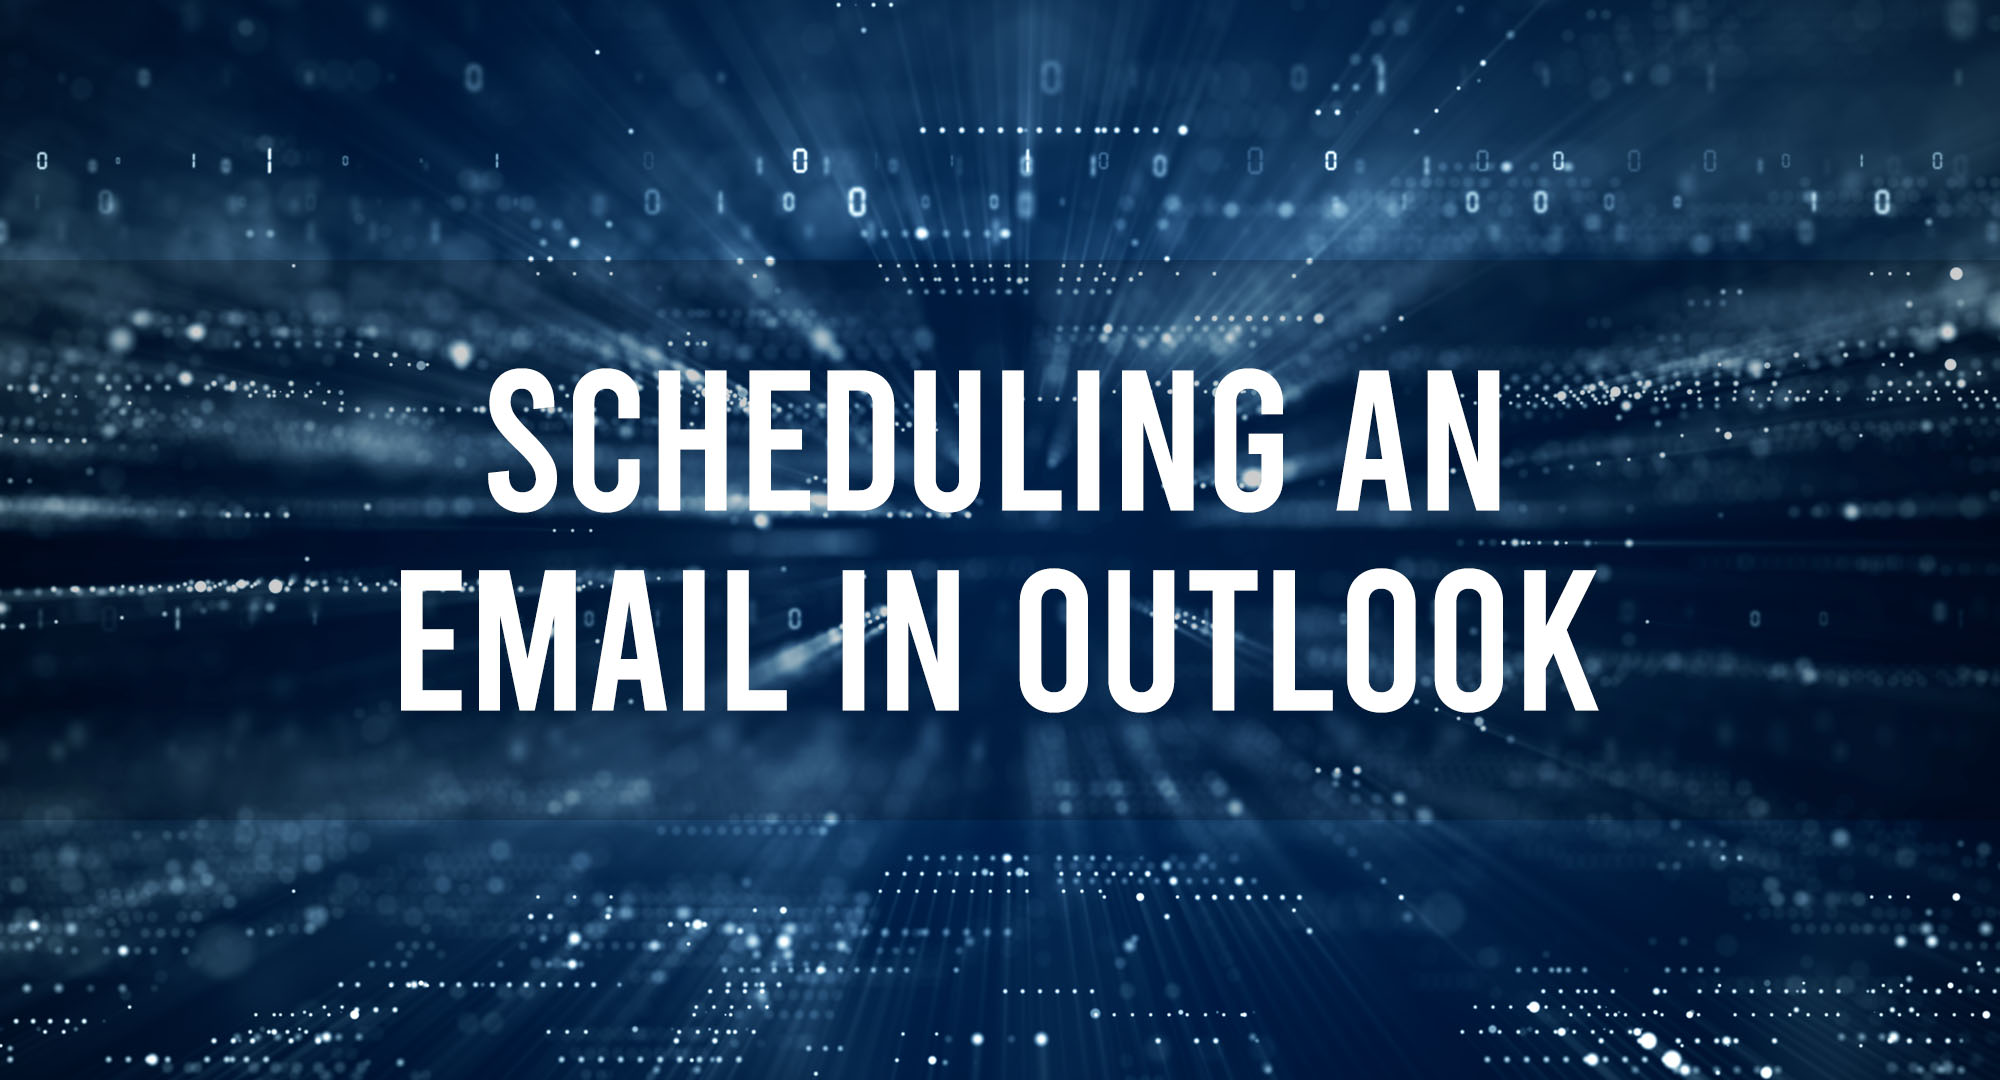 Scheduling an Email in Outlook